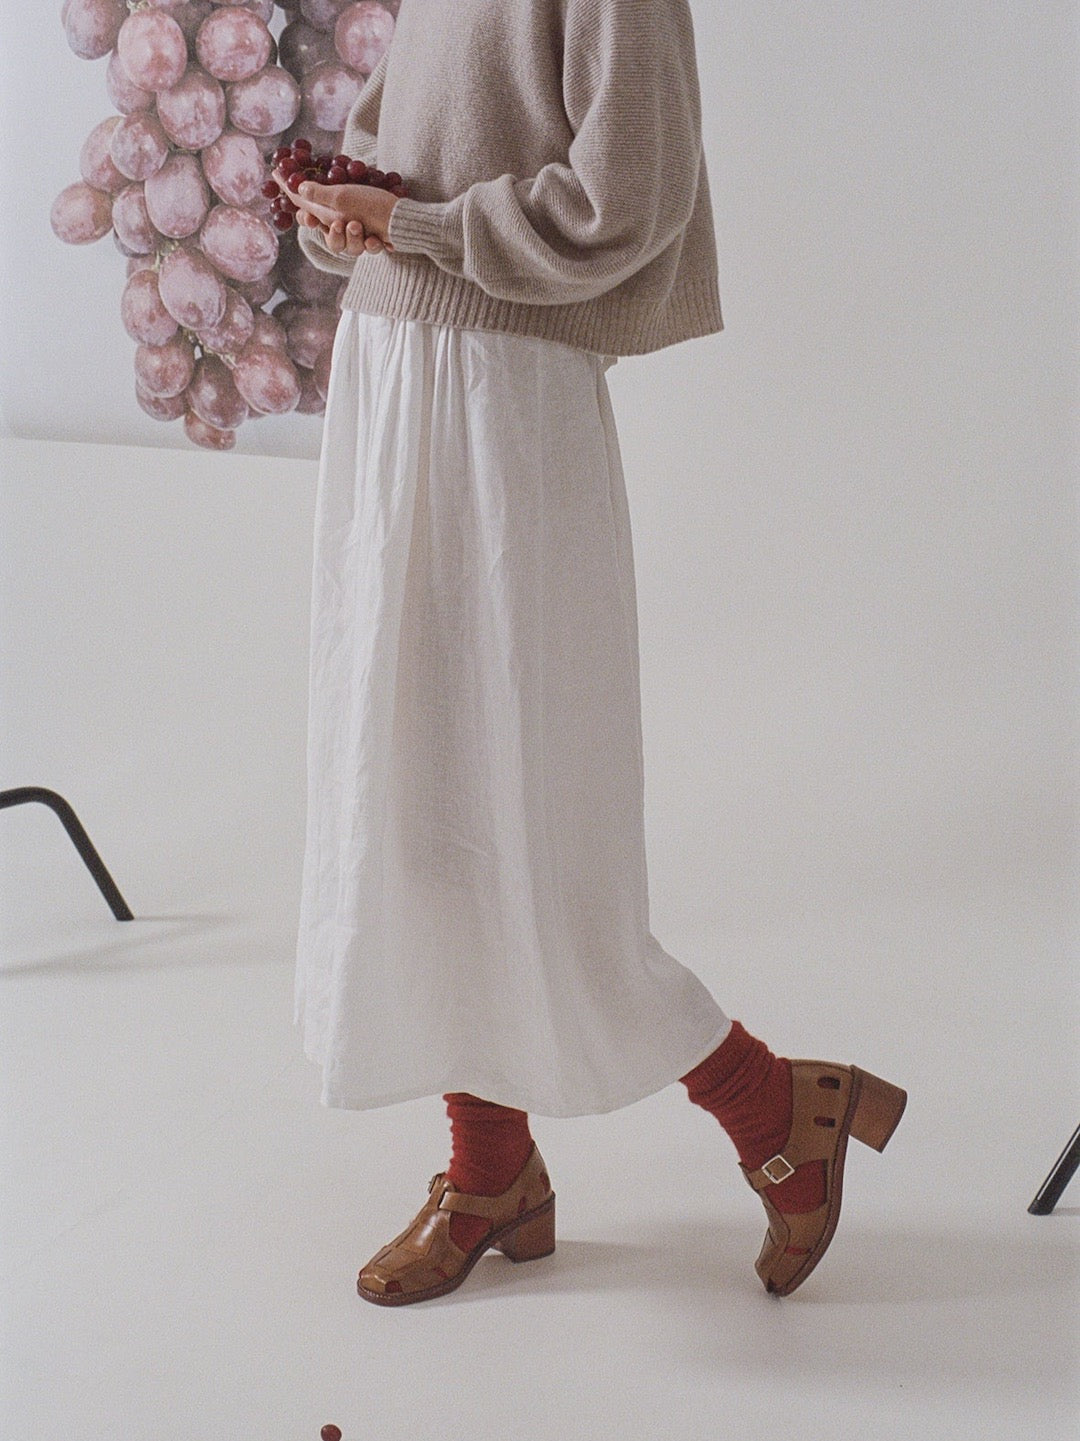 Person in a beige sweater and white skirt holding grapes, with Francie Possum Merino Socks – Crimson and brown shoes (refer to size chart for details), standing in a studio setting.